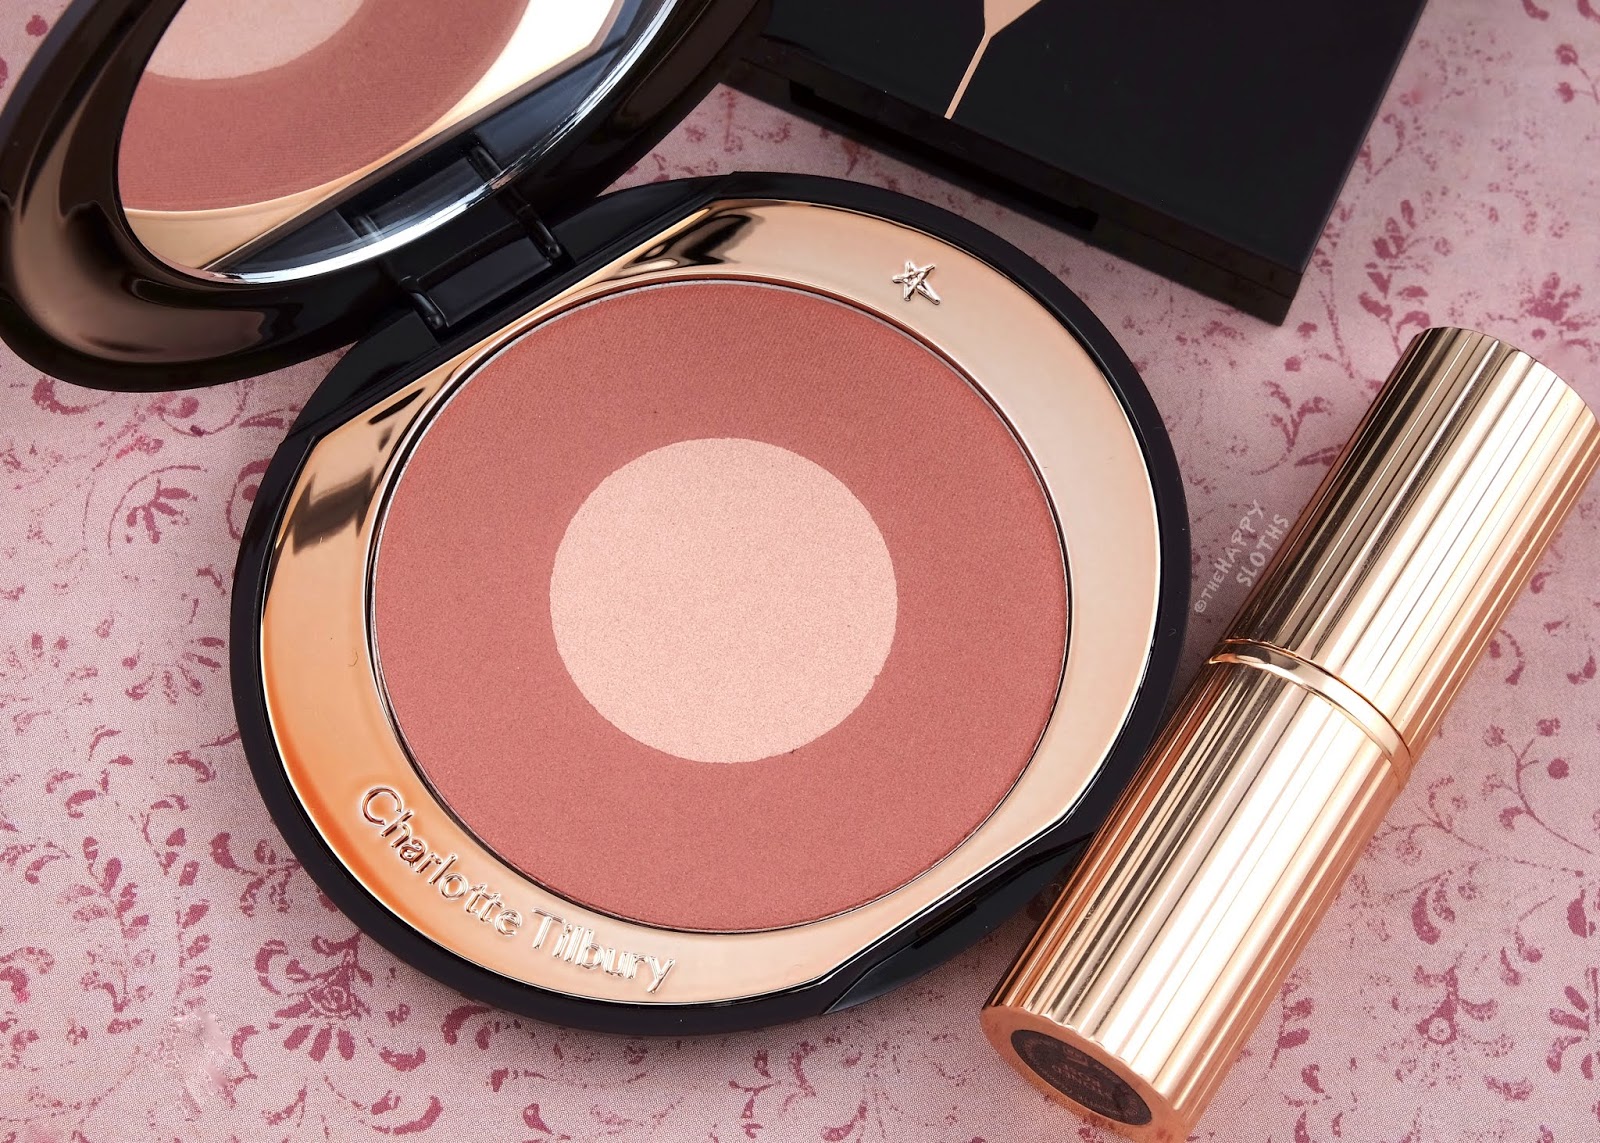 Charlotte Tilbury | Pillow Talk Cheek to Chic Blush: Review and Swatches